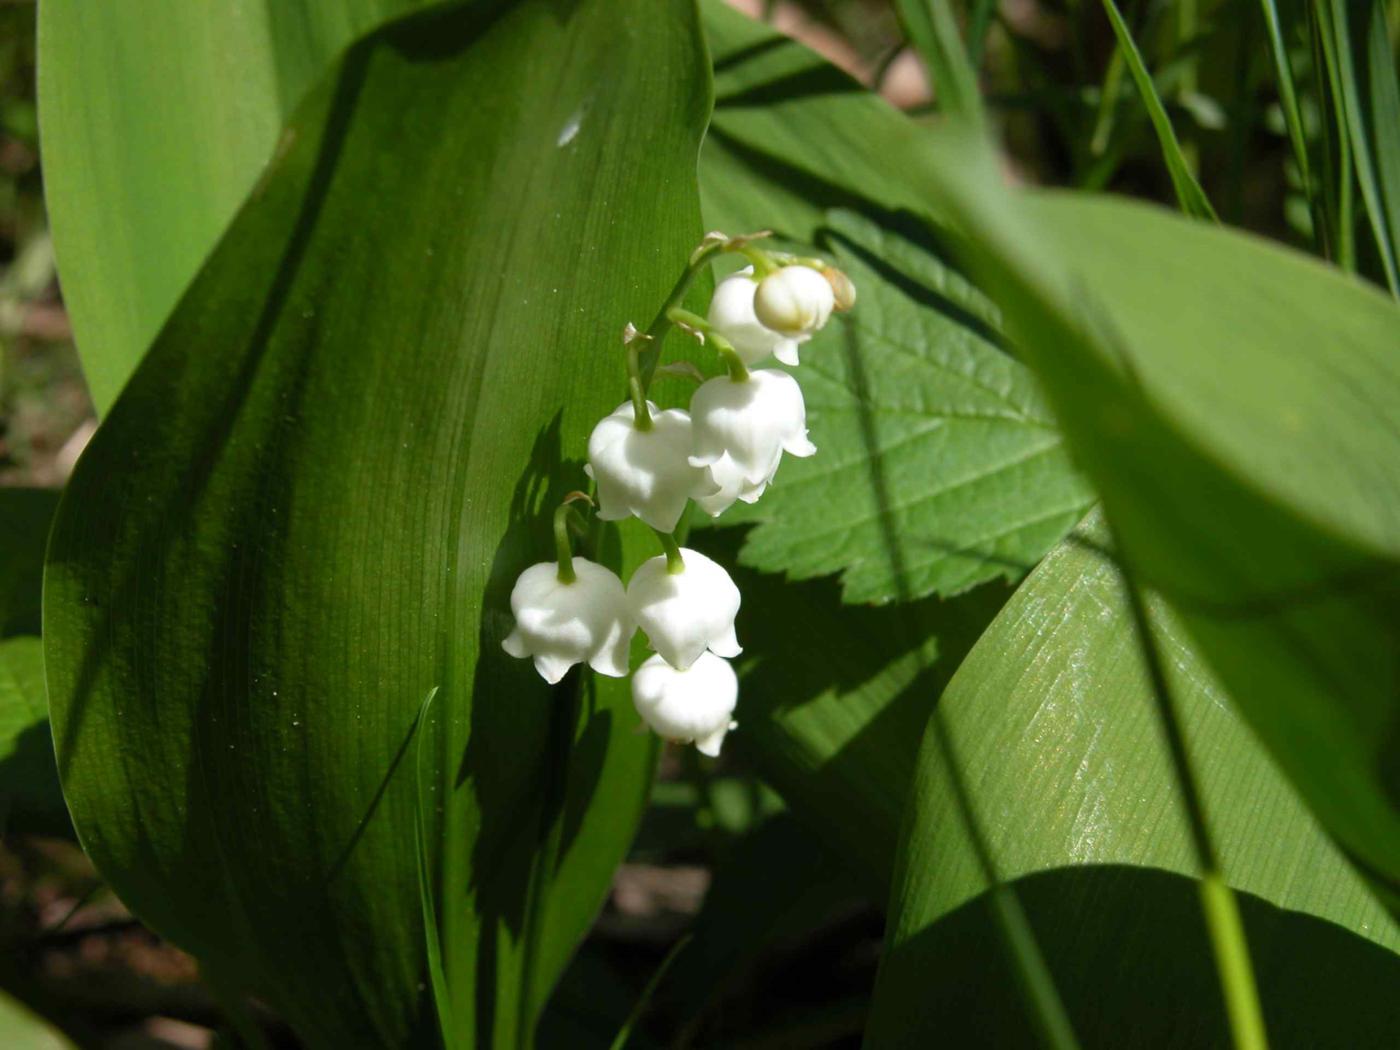 Lily-of-the-valley flower